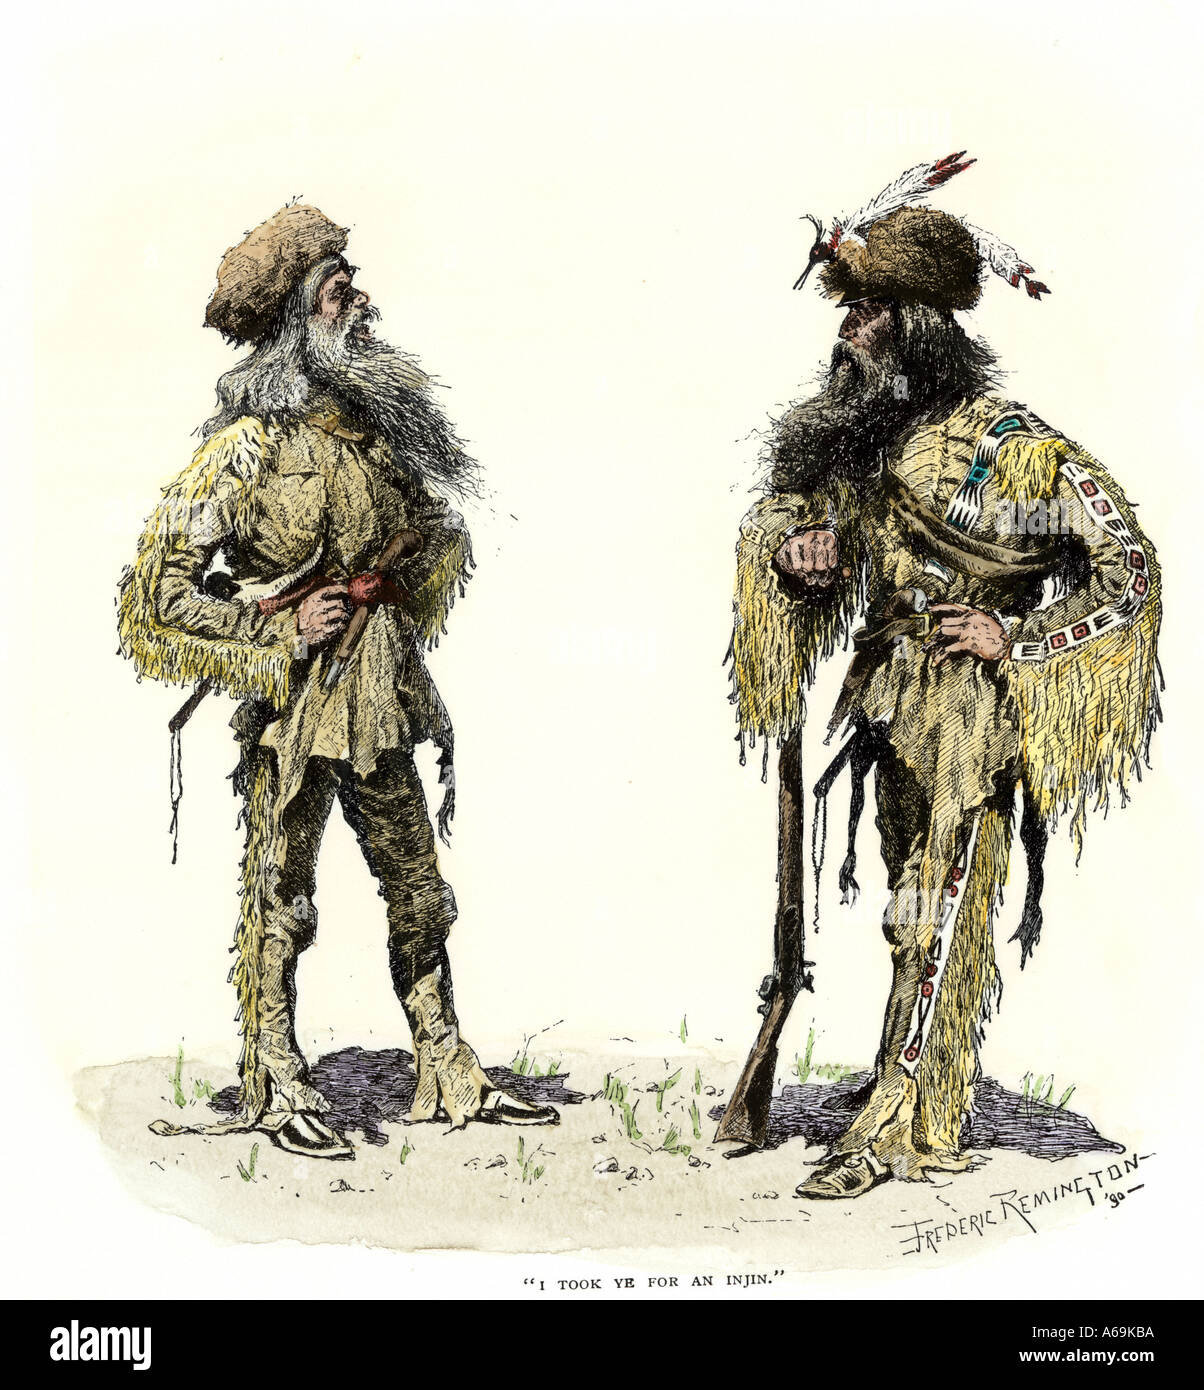 Mountain men greeting each other, " I took ye for an Injin" (mistook you for an Indian). Hand-colored woodcut of a Frederic Remington illustration Stock Photo